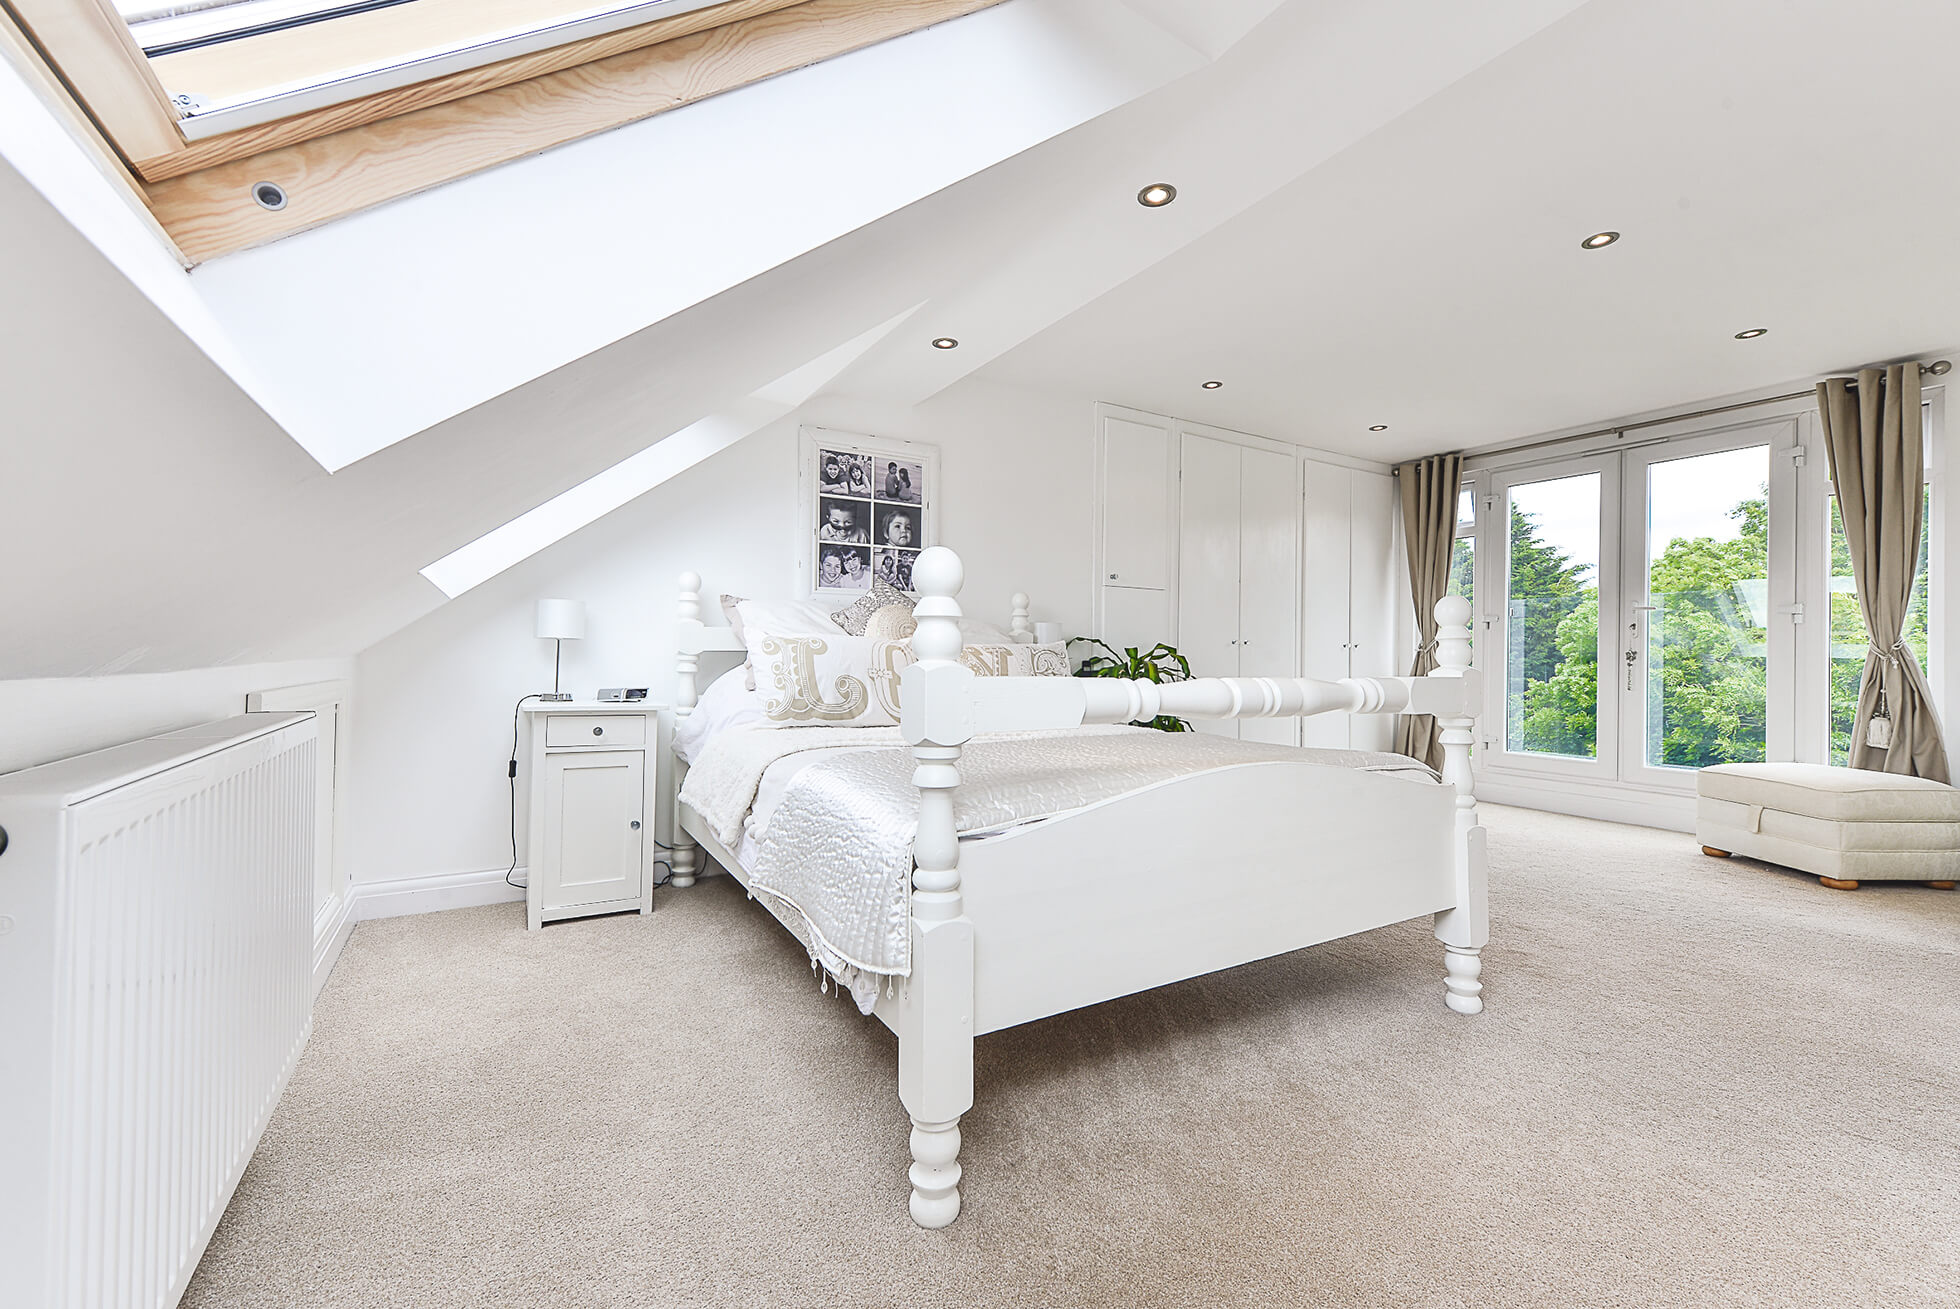 Do you have a question about converting your Loft in Thundridge? Here are the most popular questions asked by our clients.